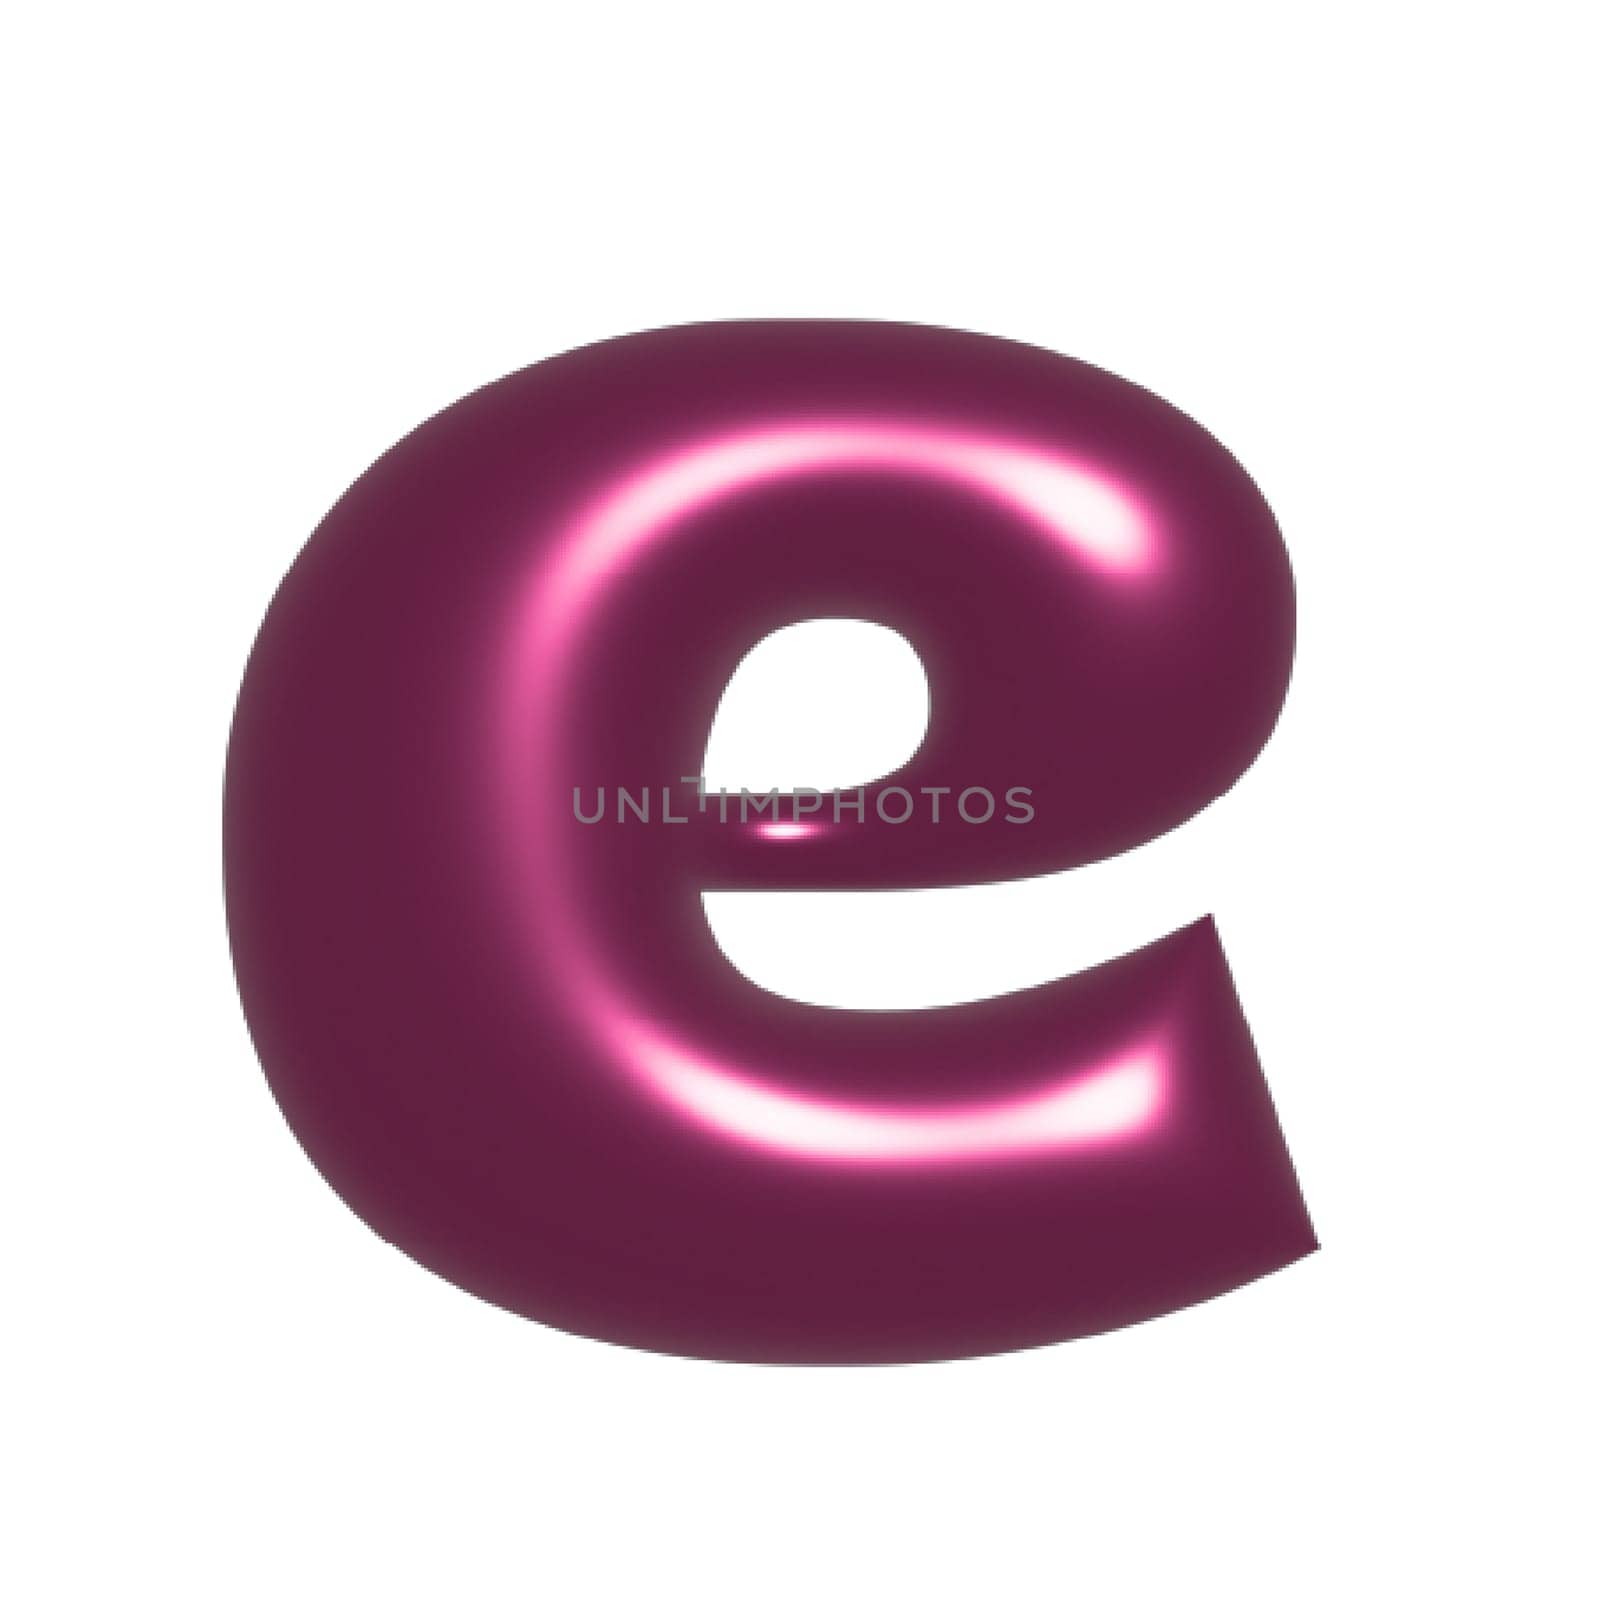 Red metal shiny reflective letter E 3D illustration by Dustick